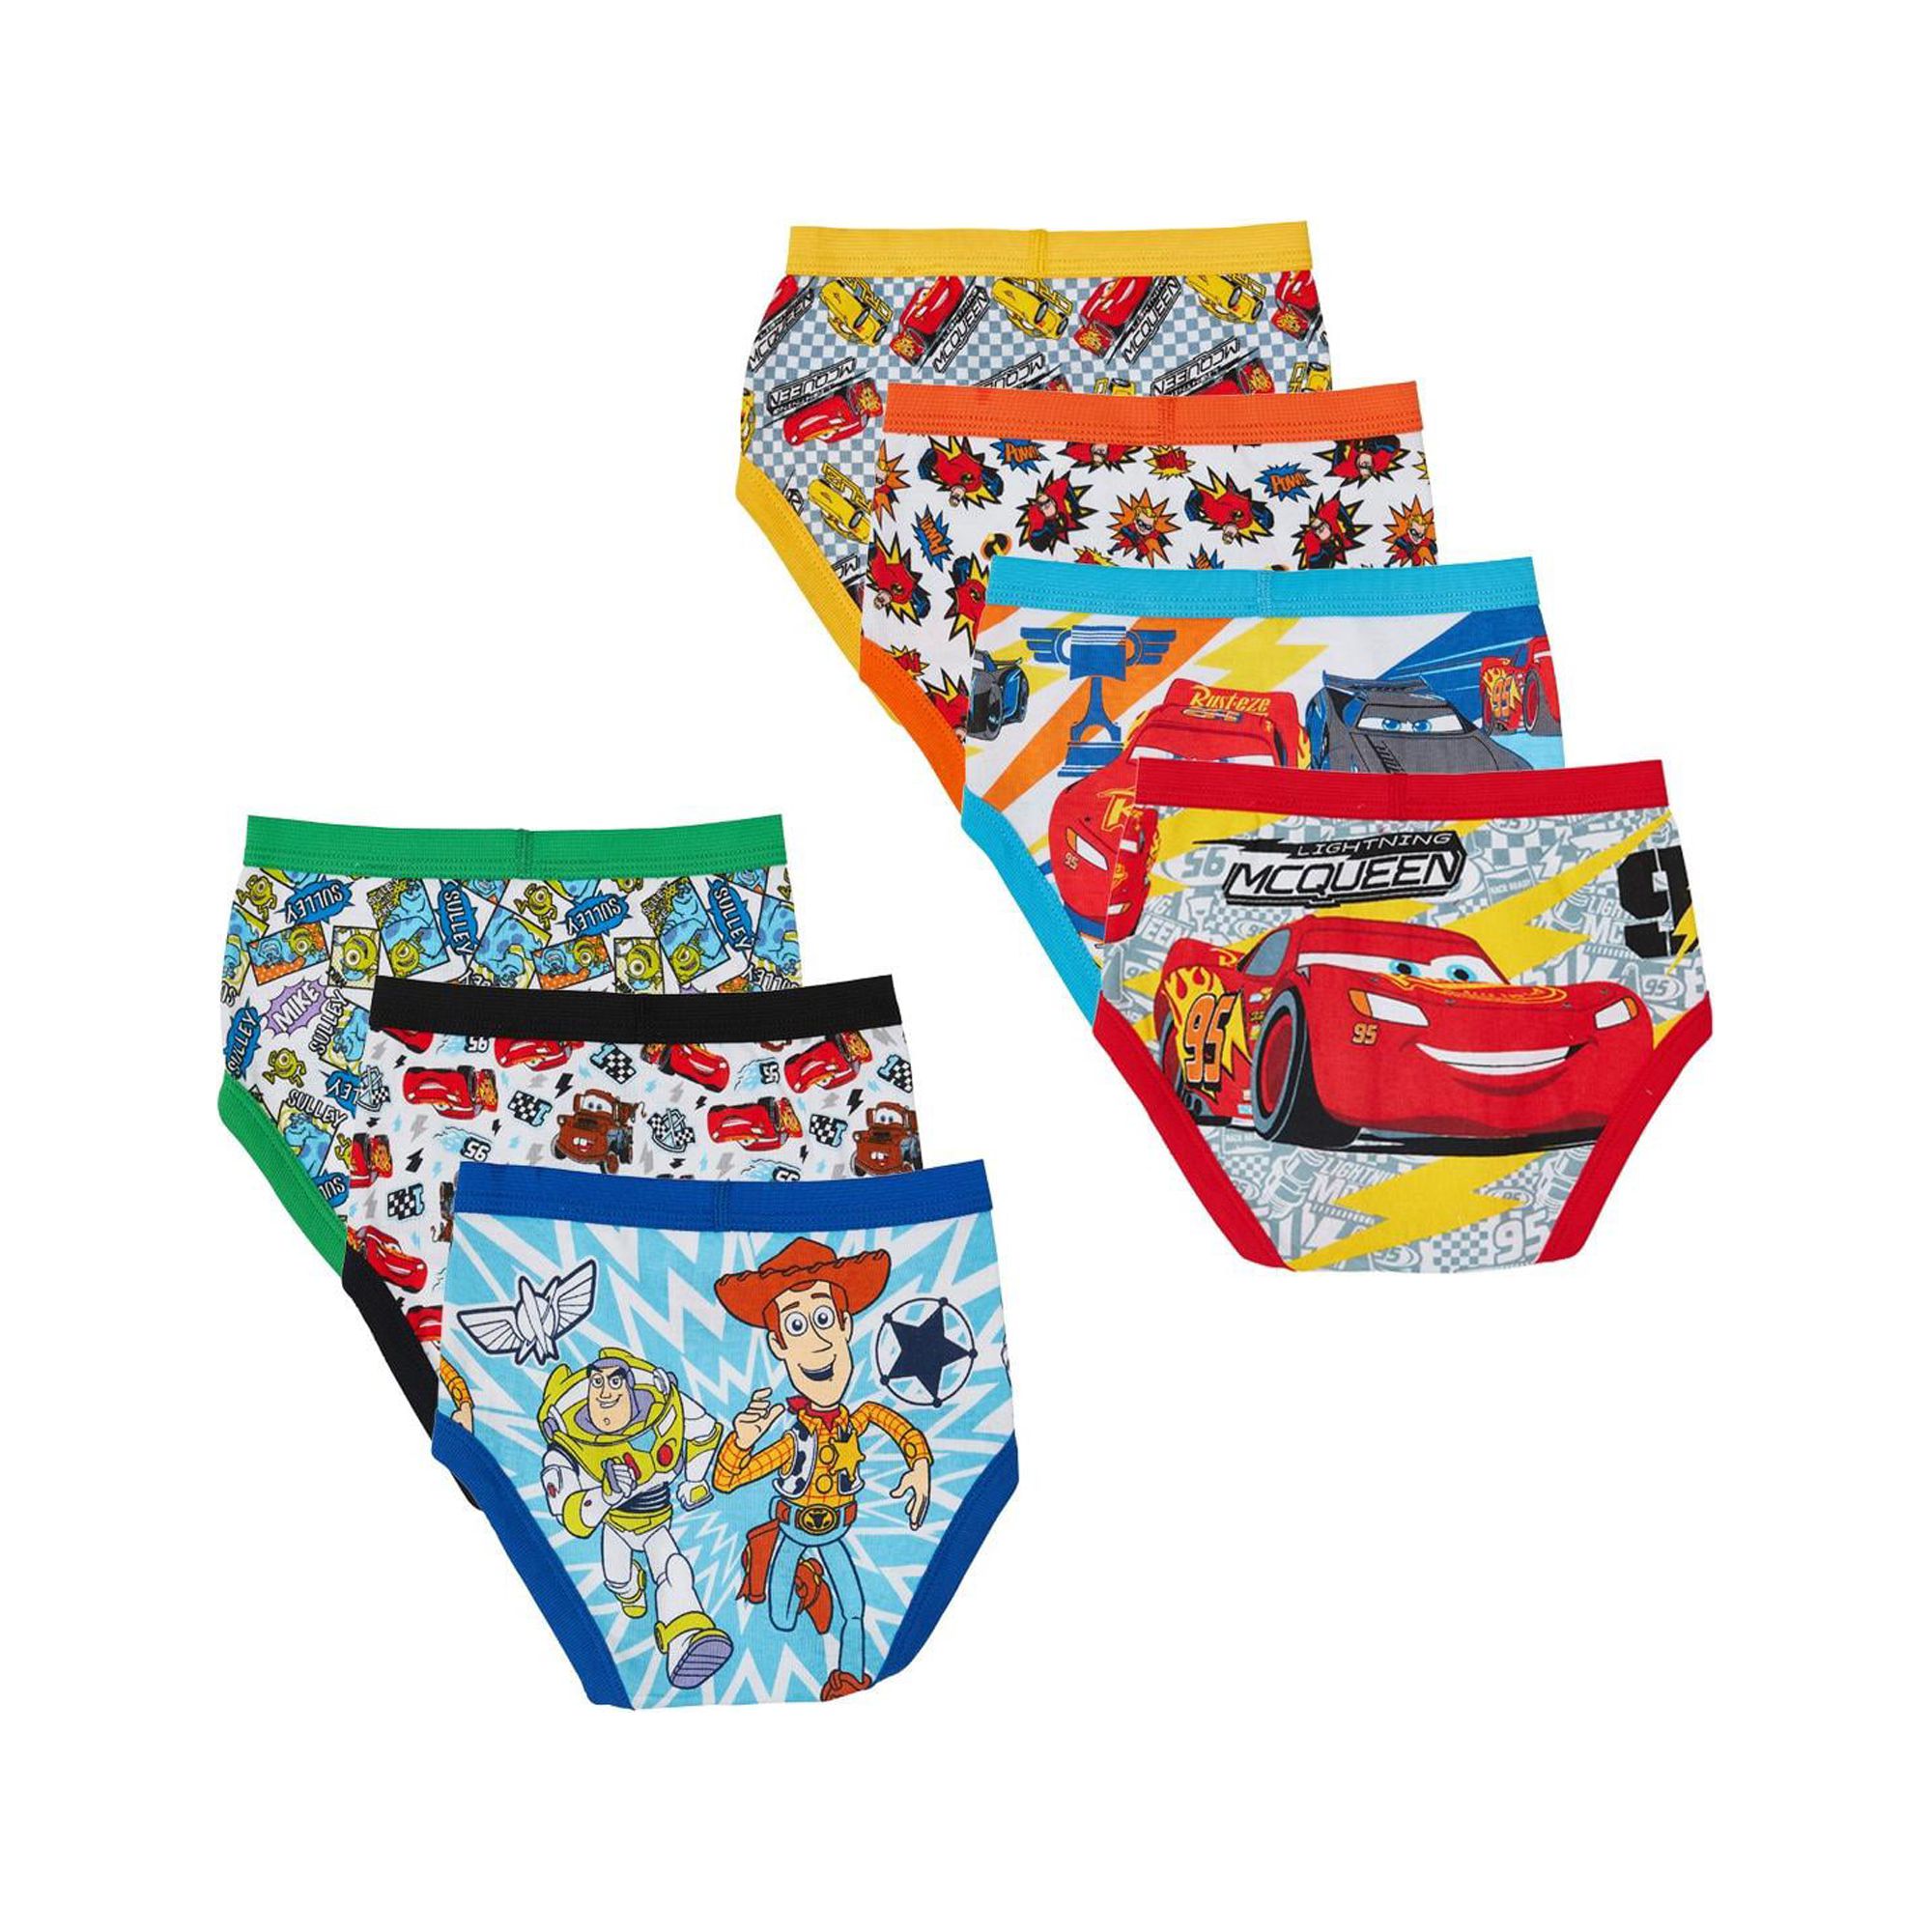 Cars, Toy Story & Monsters Inc. Variety Toddler Boy Brief Underwear, 7-Pack, Sizes 3T-4T - image 2 of 3